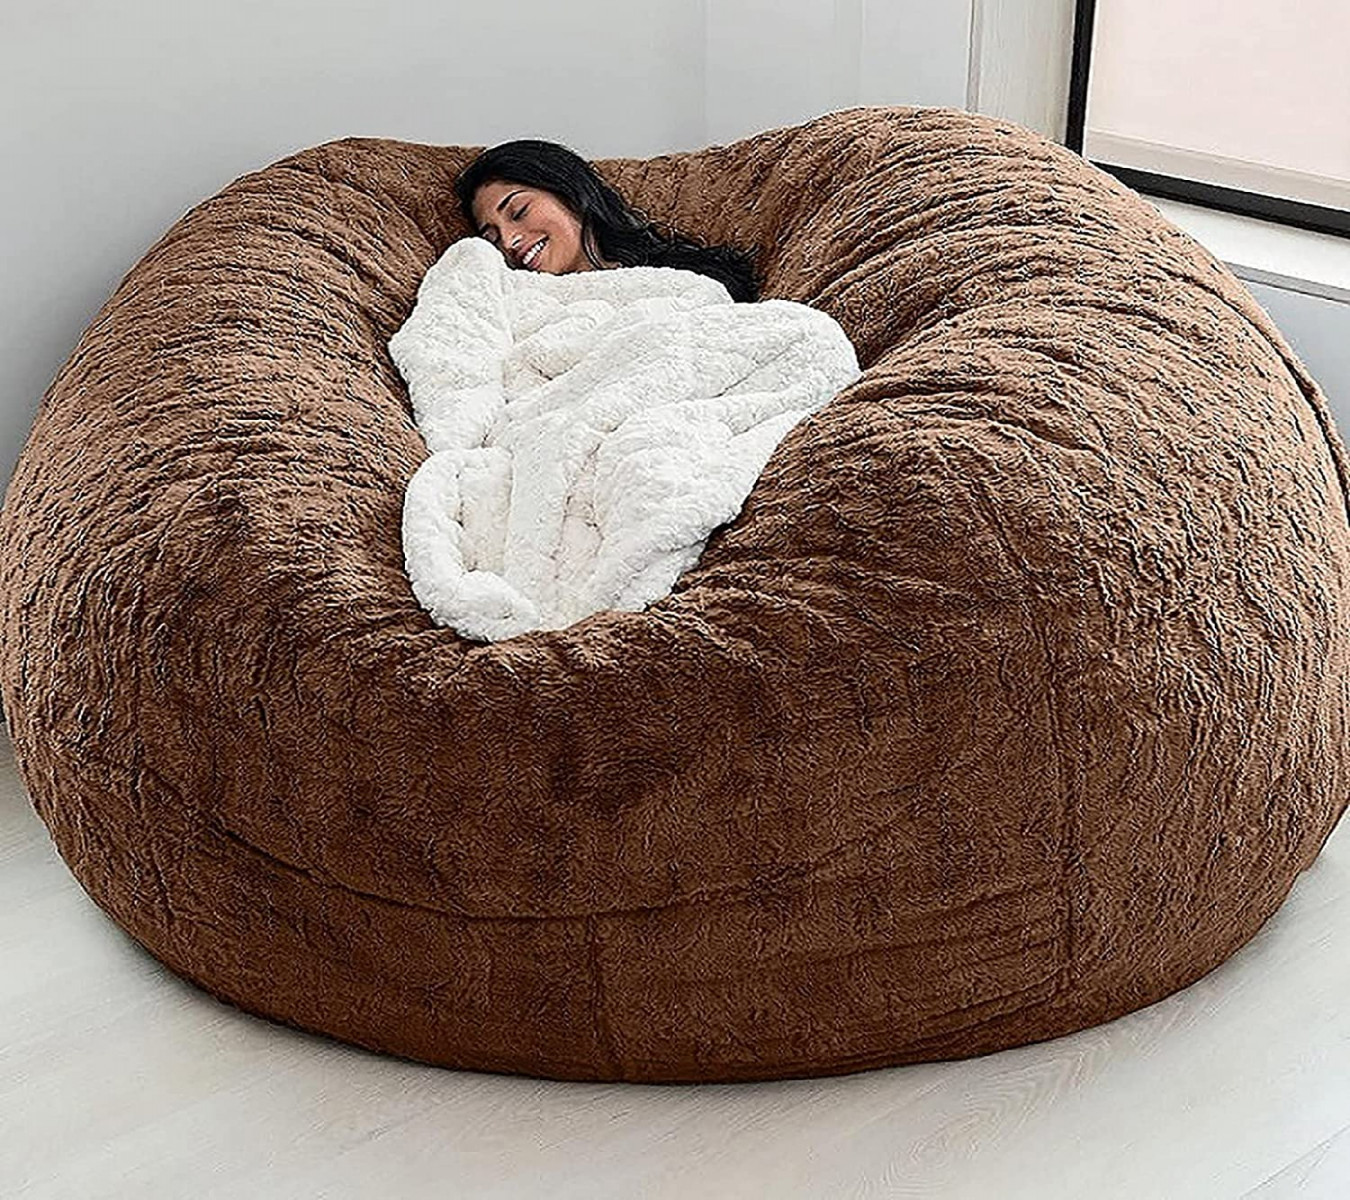 yinghesheng Bean Bag Chair,  ft Giant Fur Bean Bag Cover Fluffy Fur  Portable Living Room Lazy Sofa Bed Cover without Filler, Brown,  x  cm